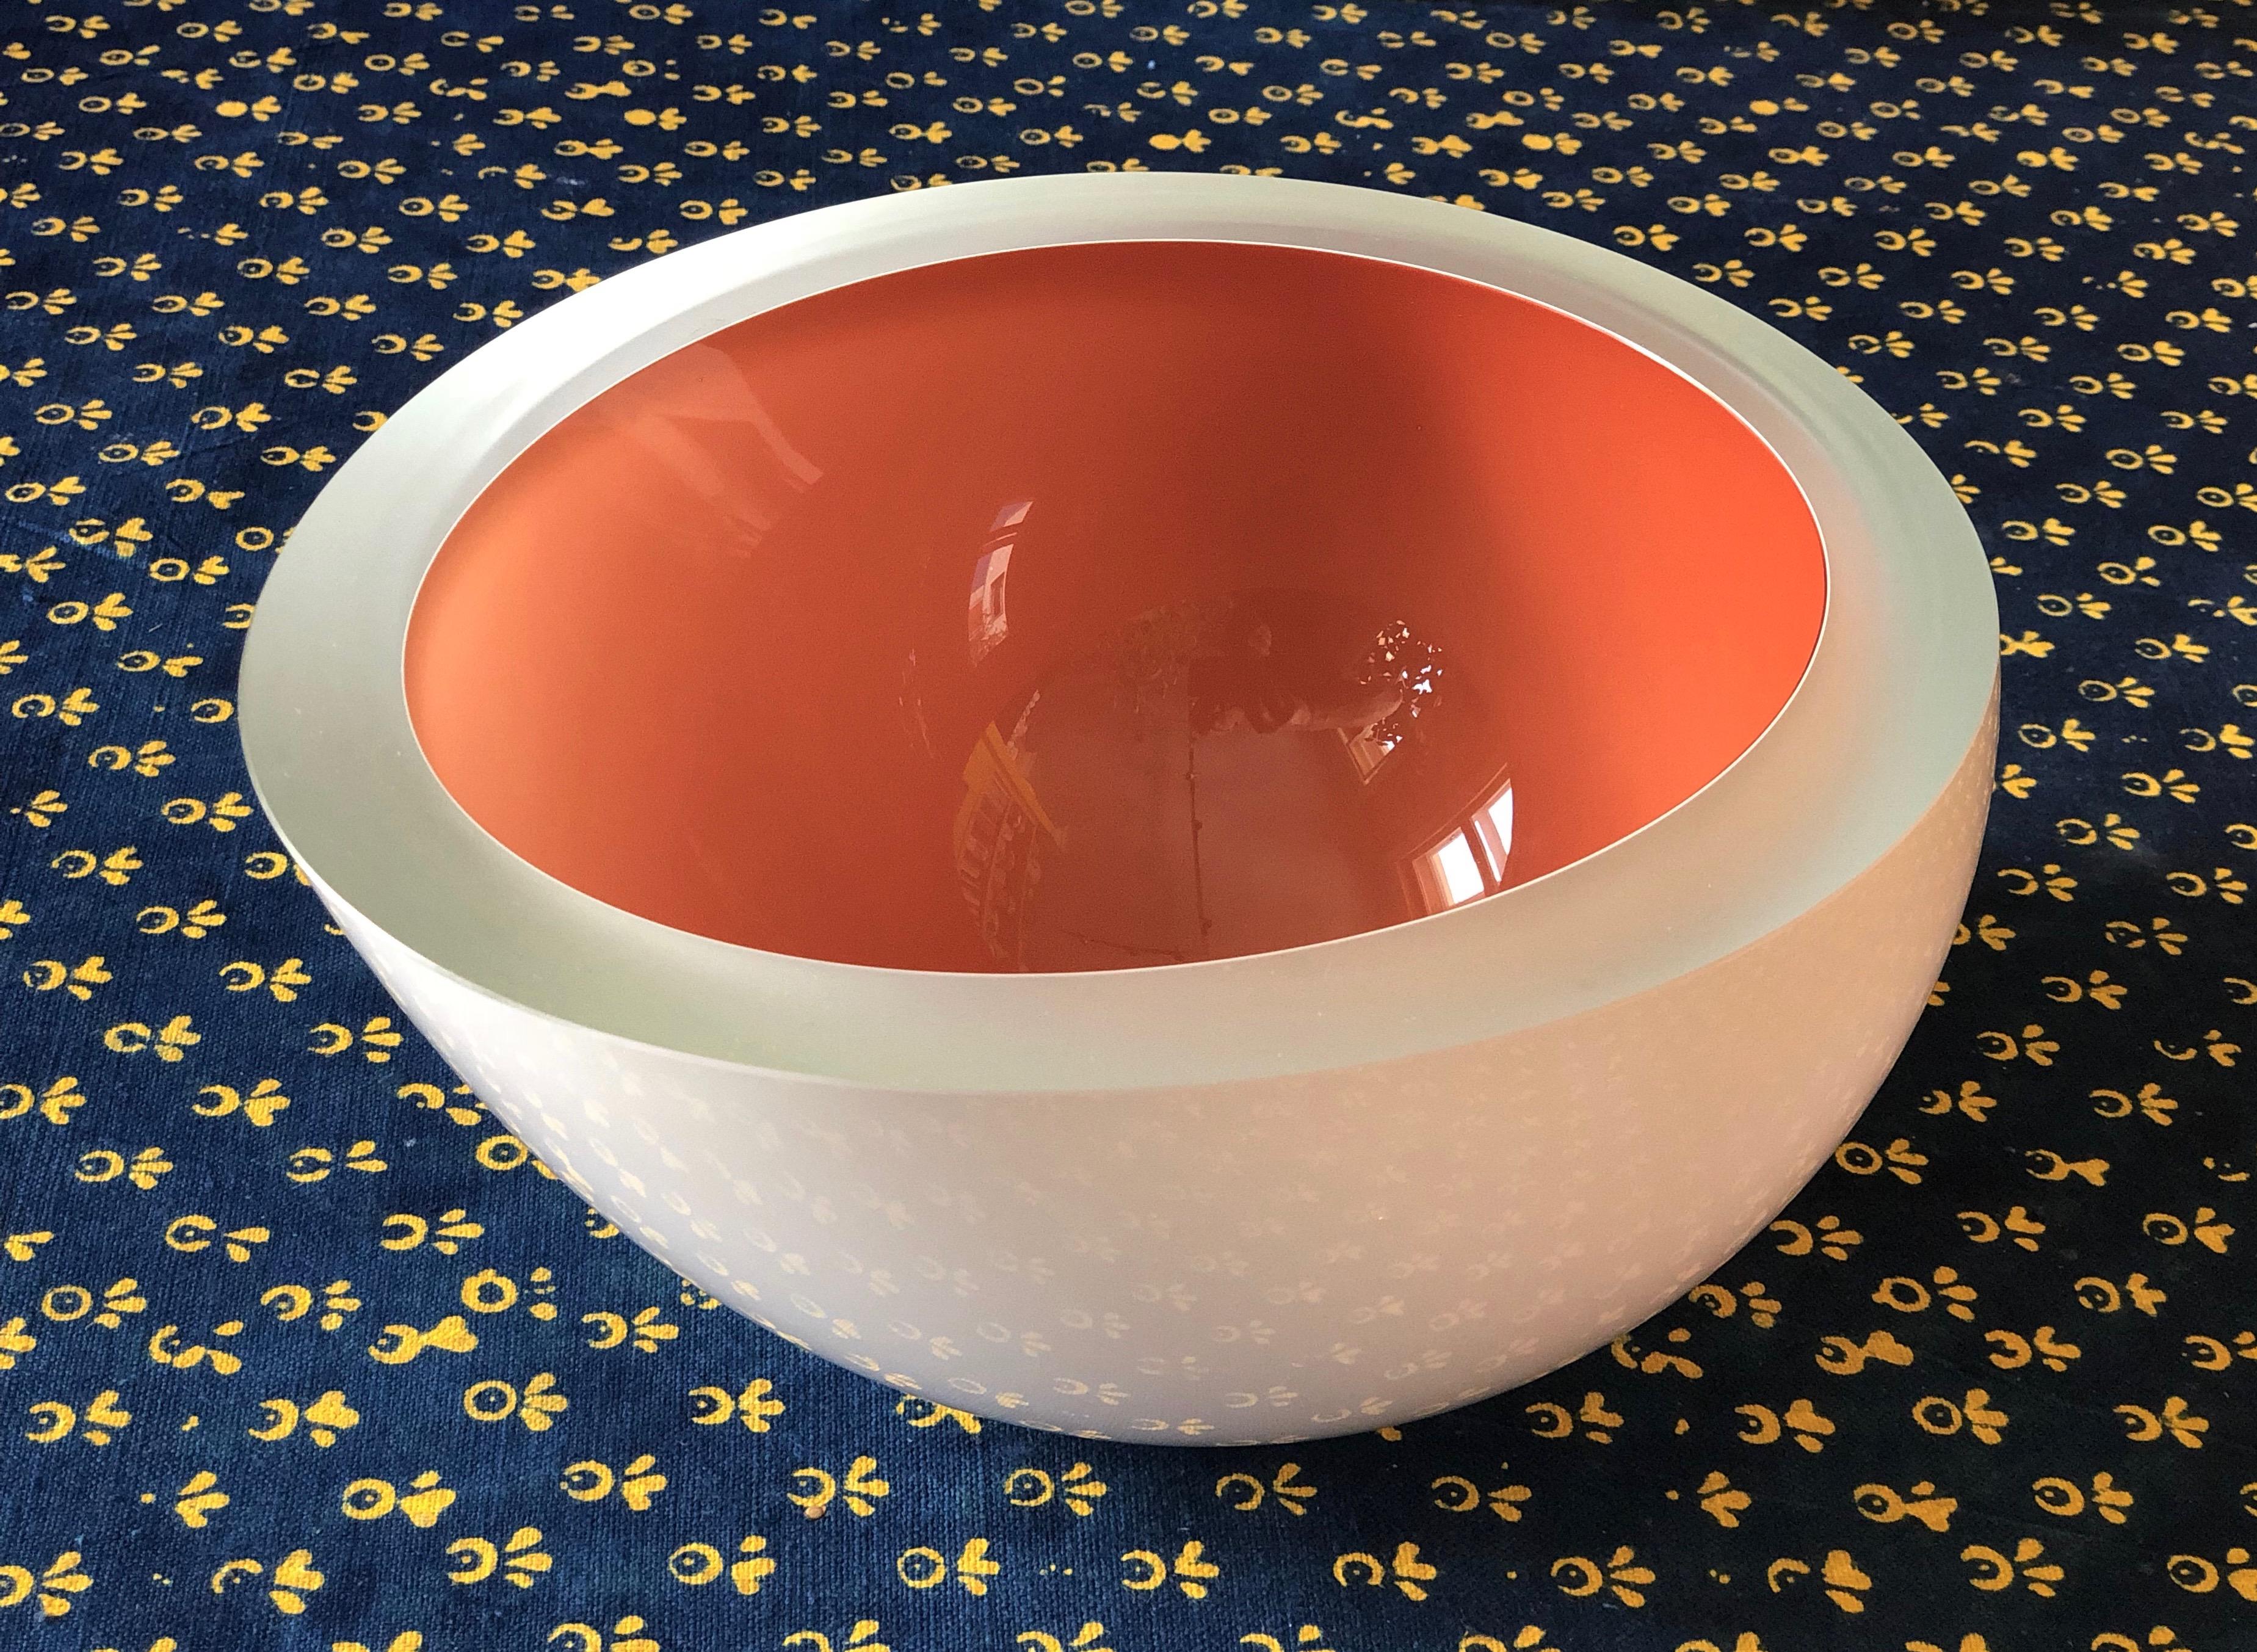 Contemporary Studio Glass Bowl in Coral Color, Made in the Czech Republic, 2010 For Sale 1